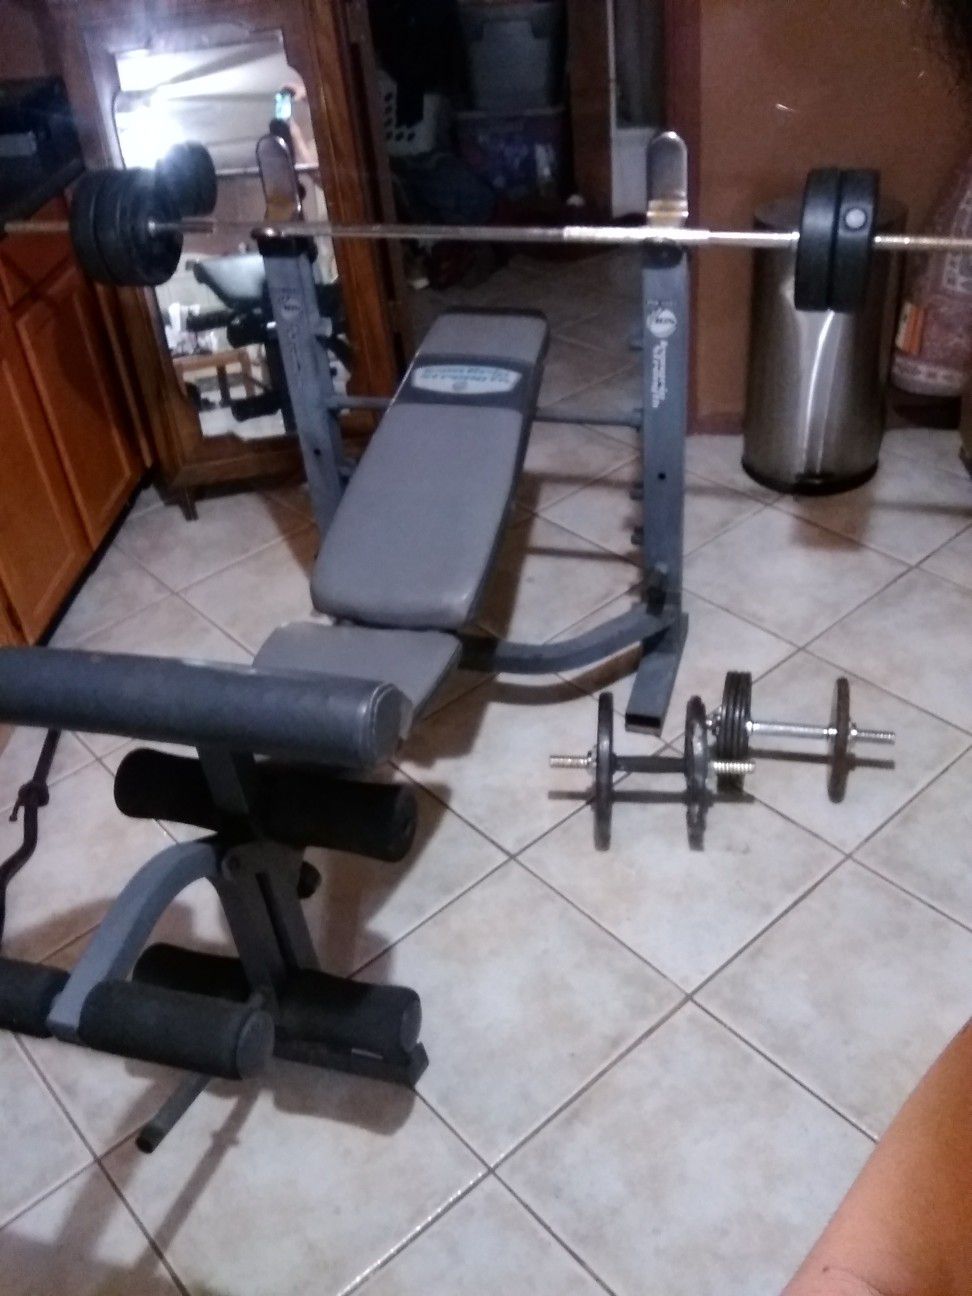 Weight bench with 50 pounds and dumbbells